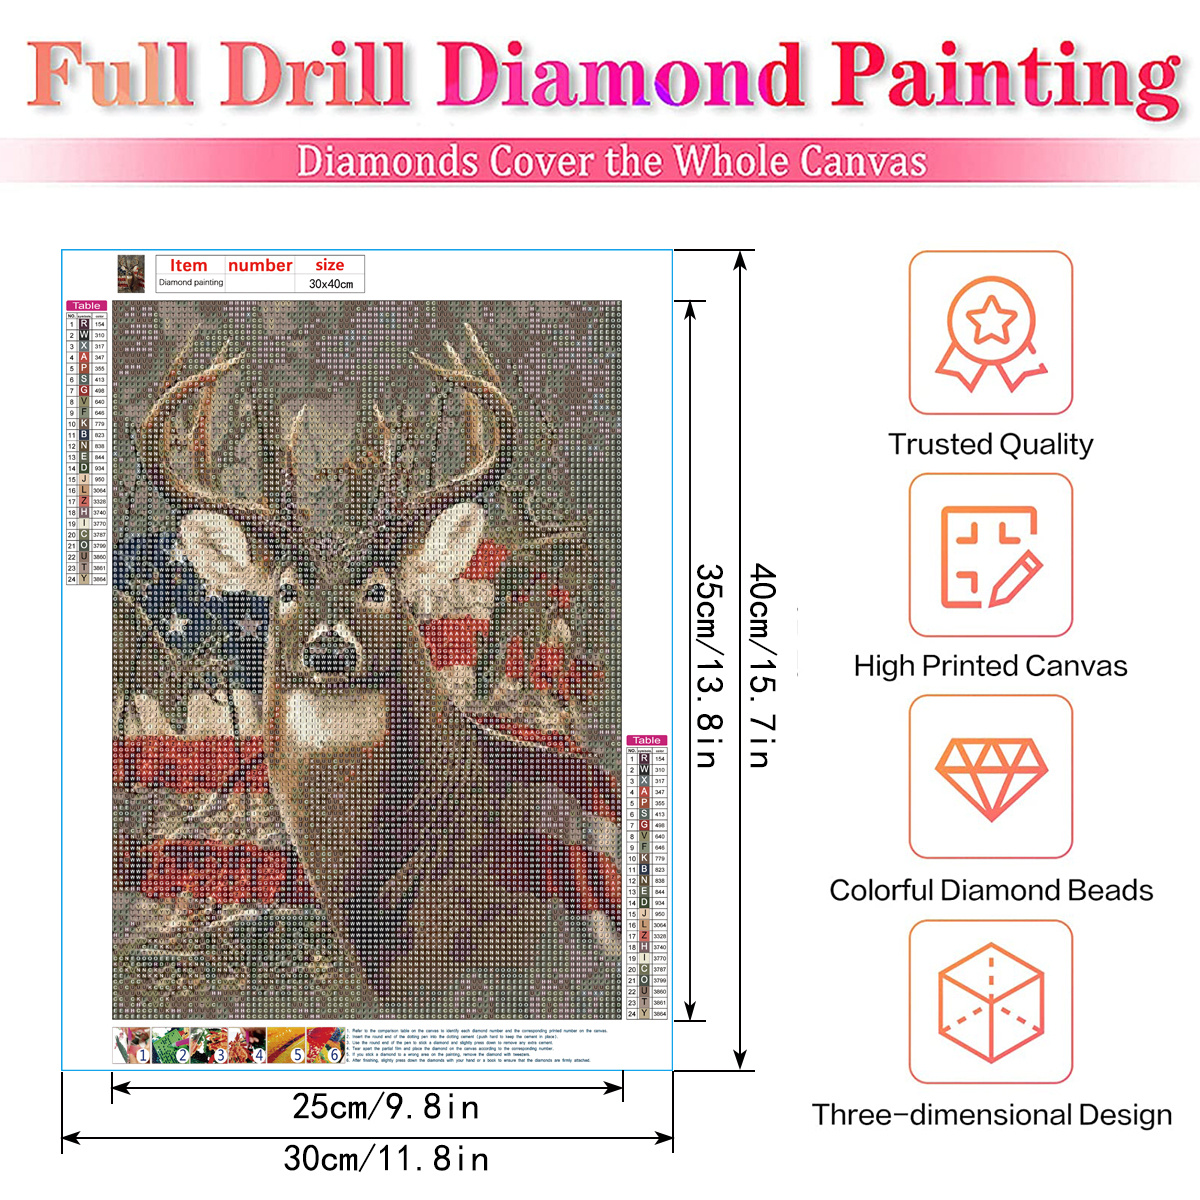 5d Diy Diamond Painting Kit For Adults And Kids - Large Size  (11.8x15.7in/30x40cm) - Landscape, Full Drill Round Diamond Art Kit, Home  Wall Decor